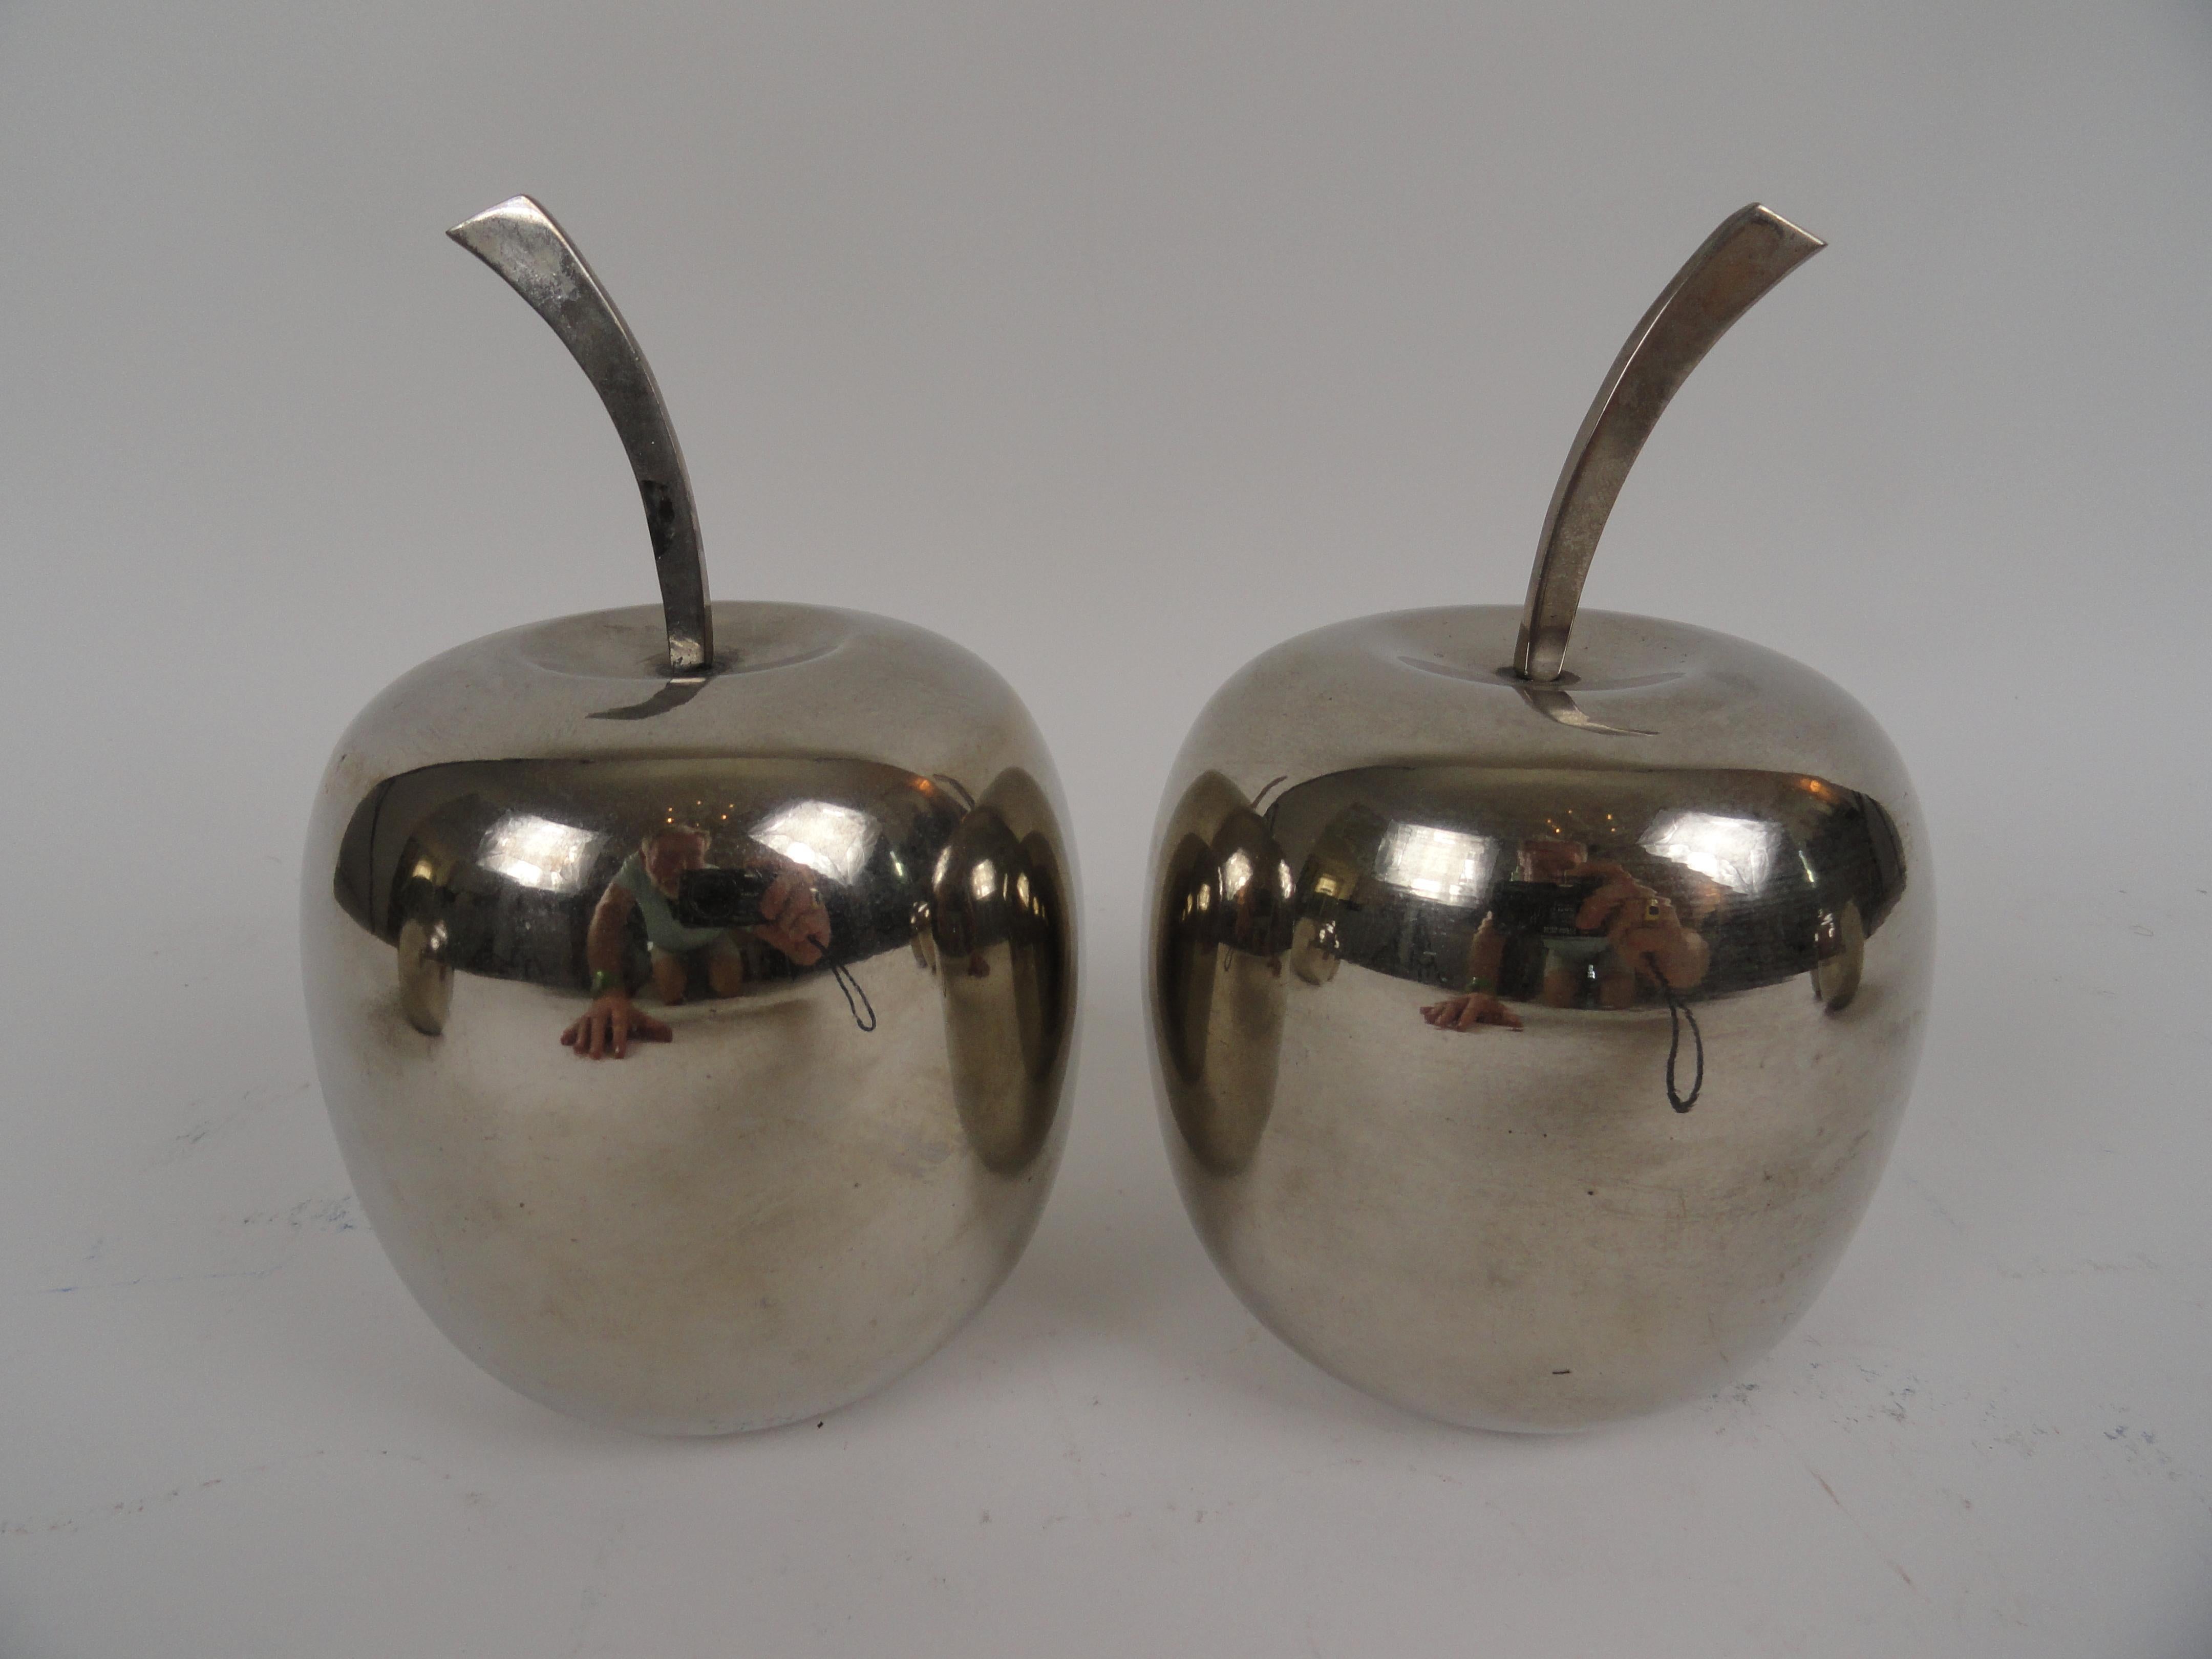 Six-piece collection of silver plated sculpture fruit. Two pears and four apples, all with stems.